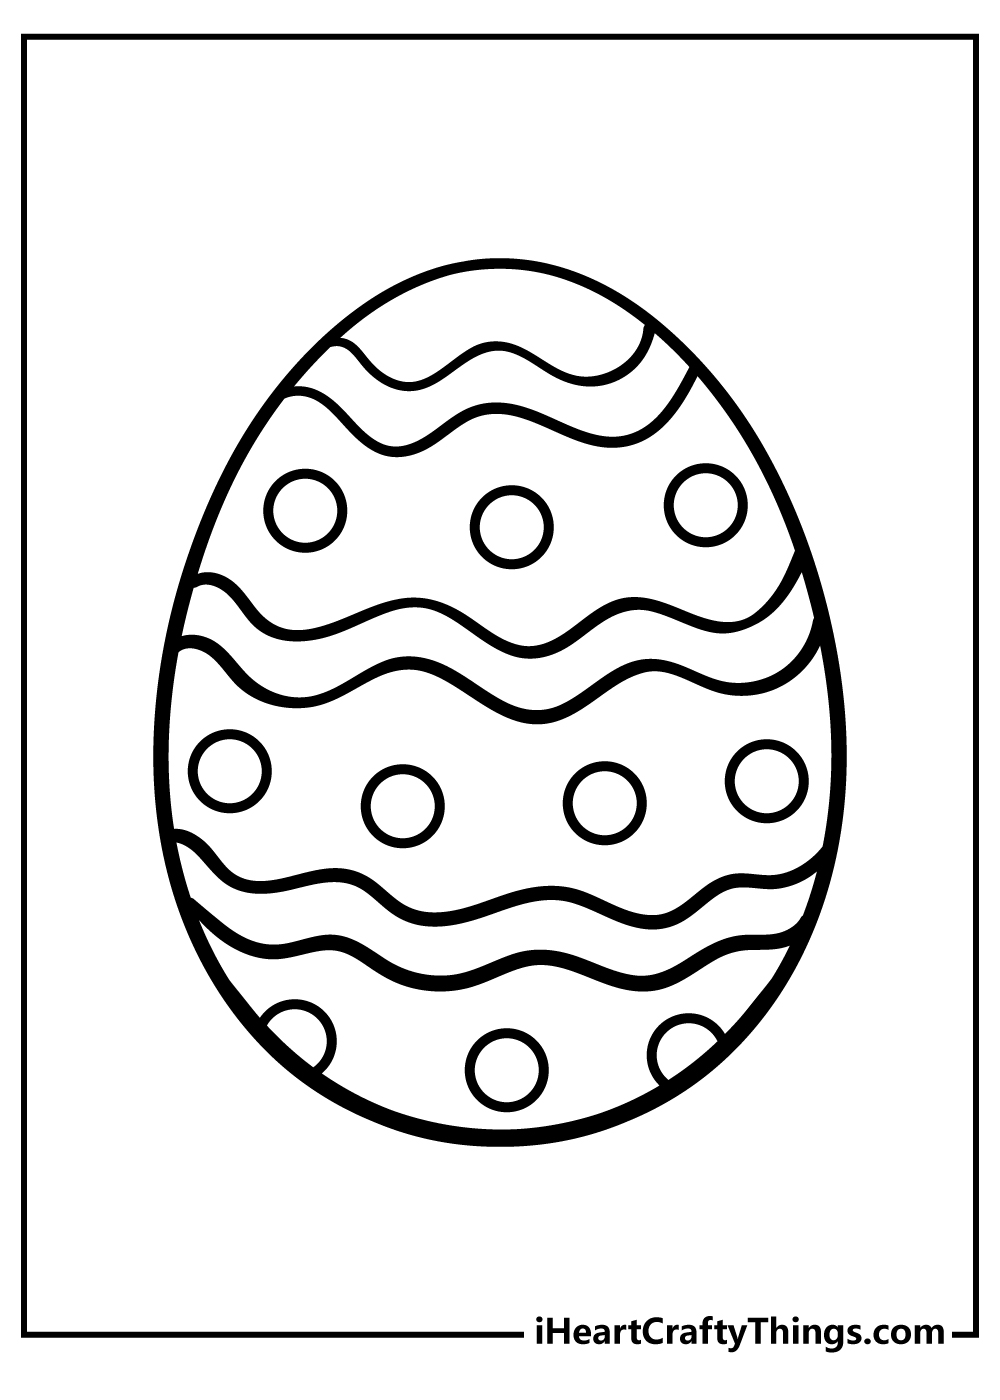 Free Printable Easter Egg Coloring Pages Great Coloring